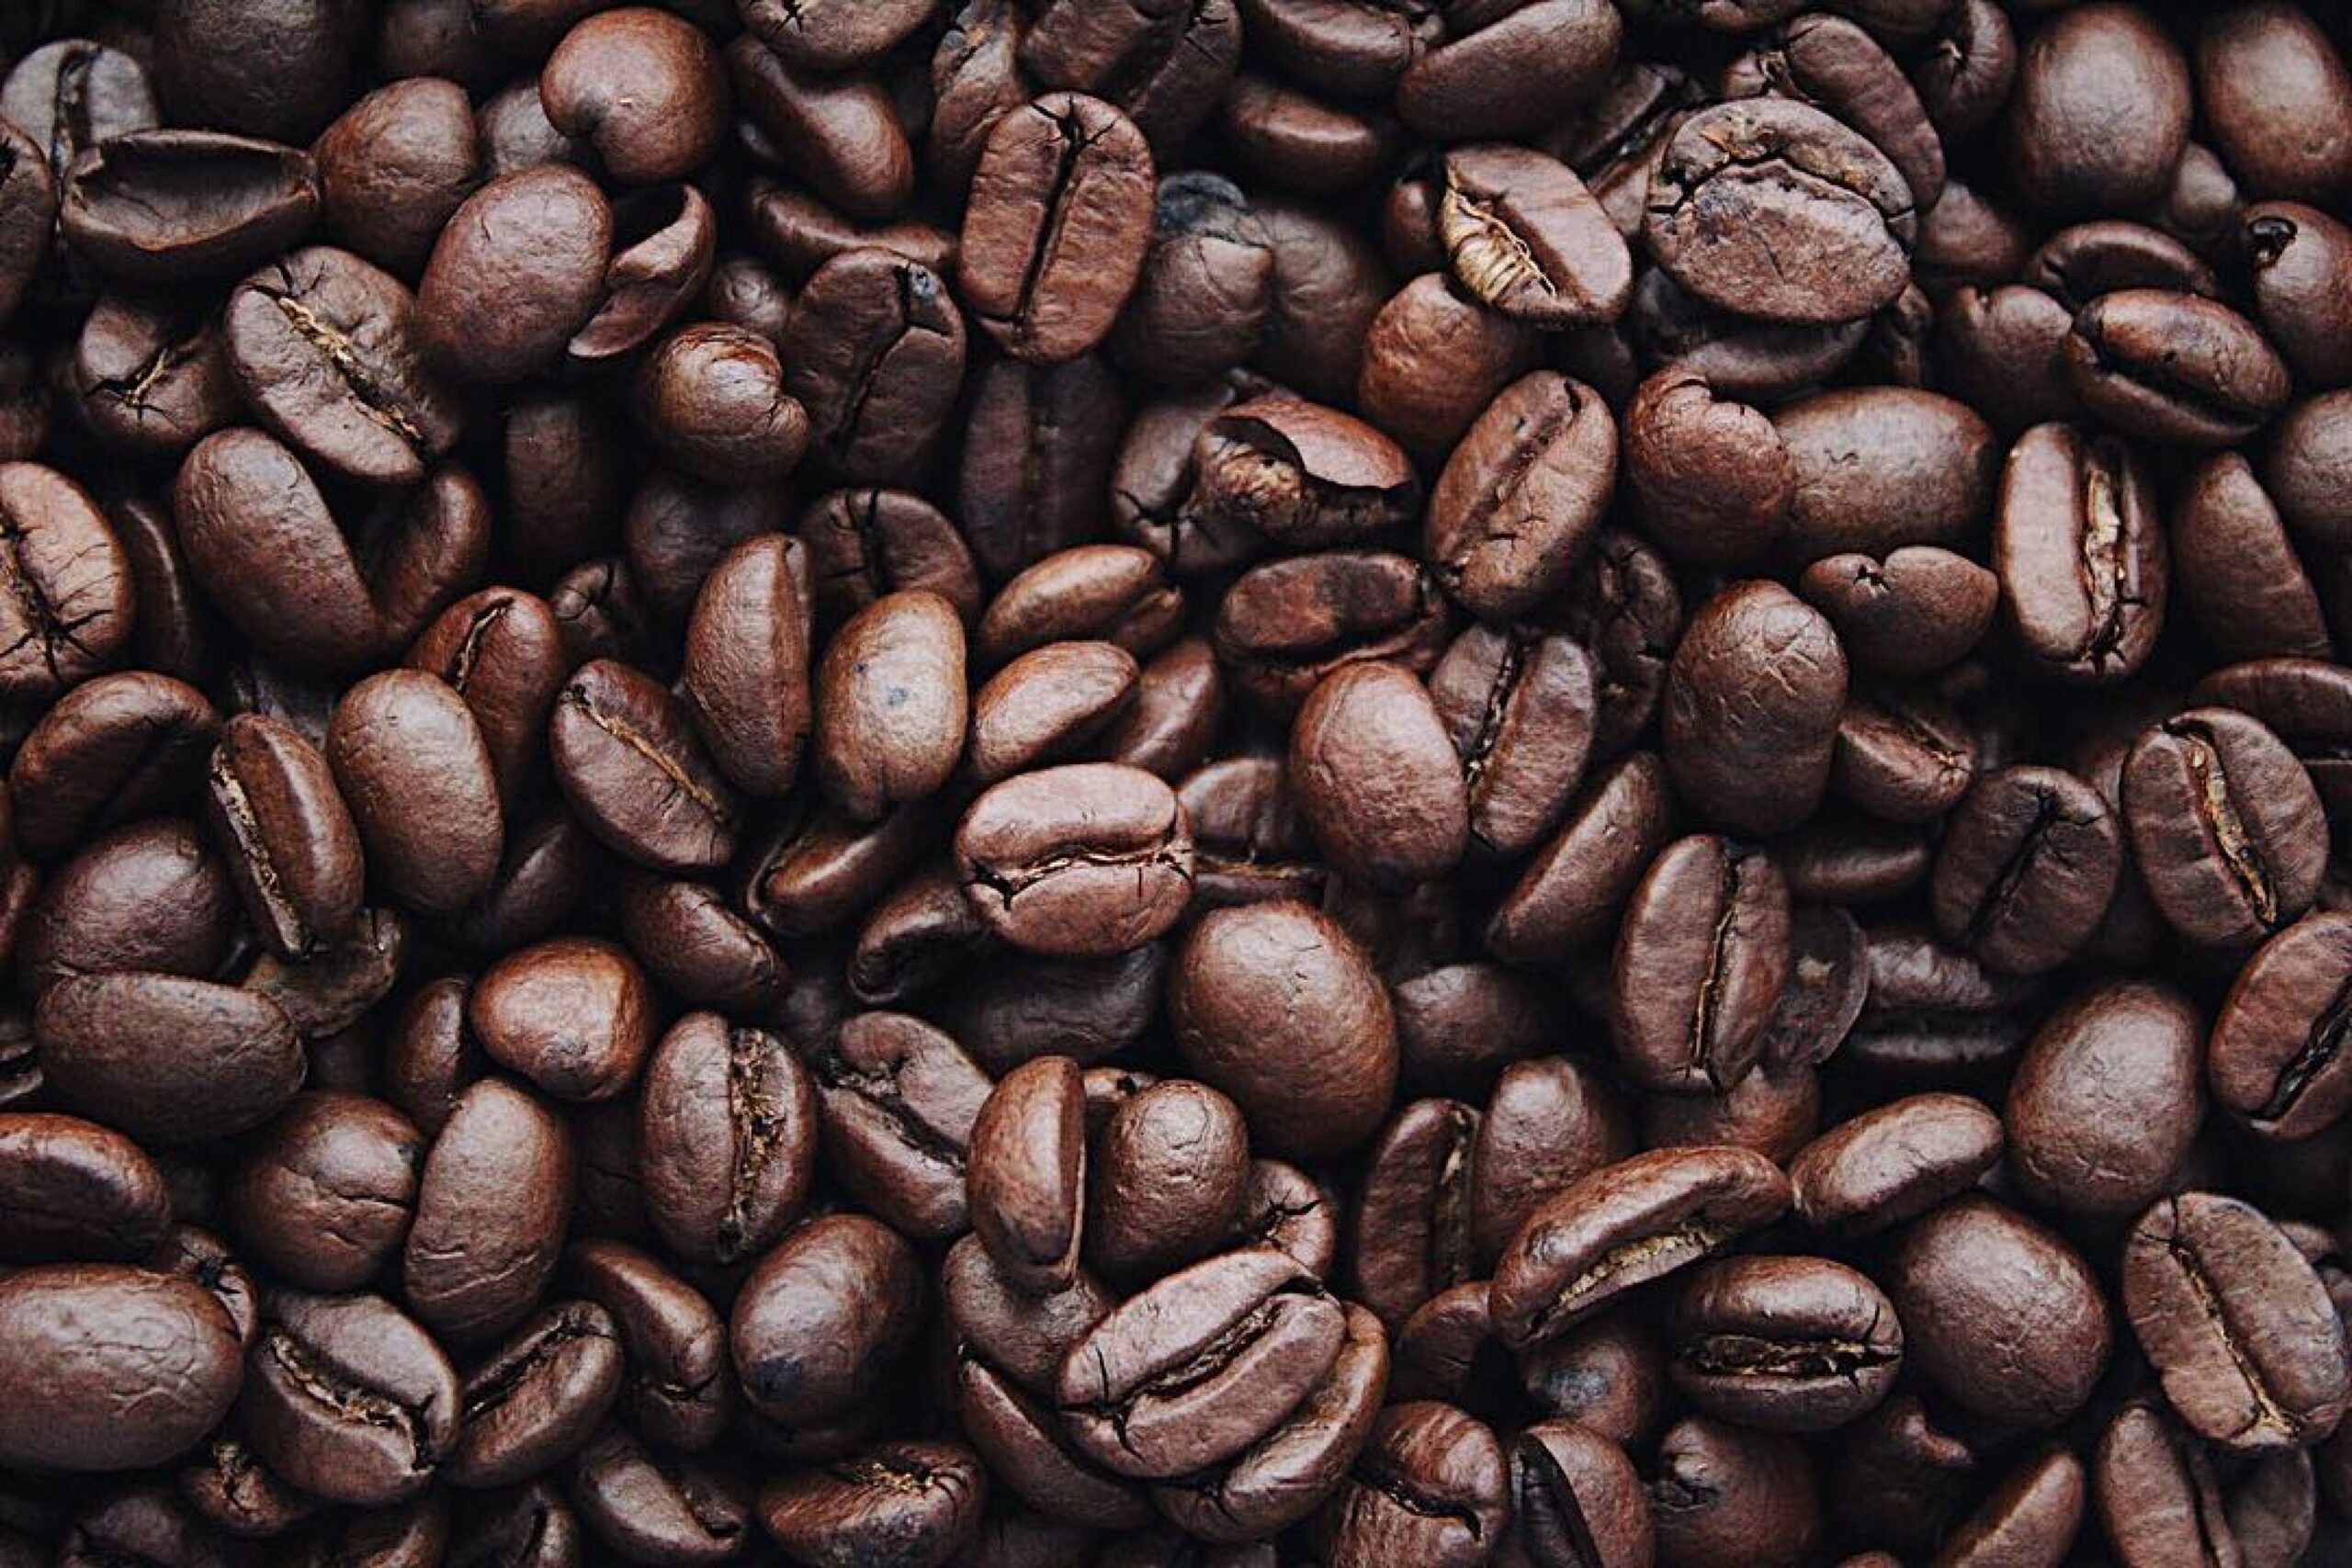 DIY Coffee Roasting: How to Roast Your Own Beans at Home